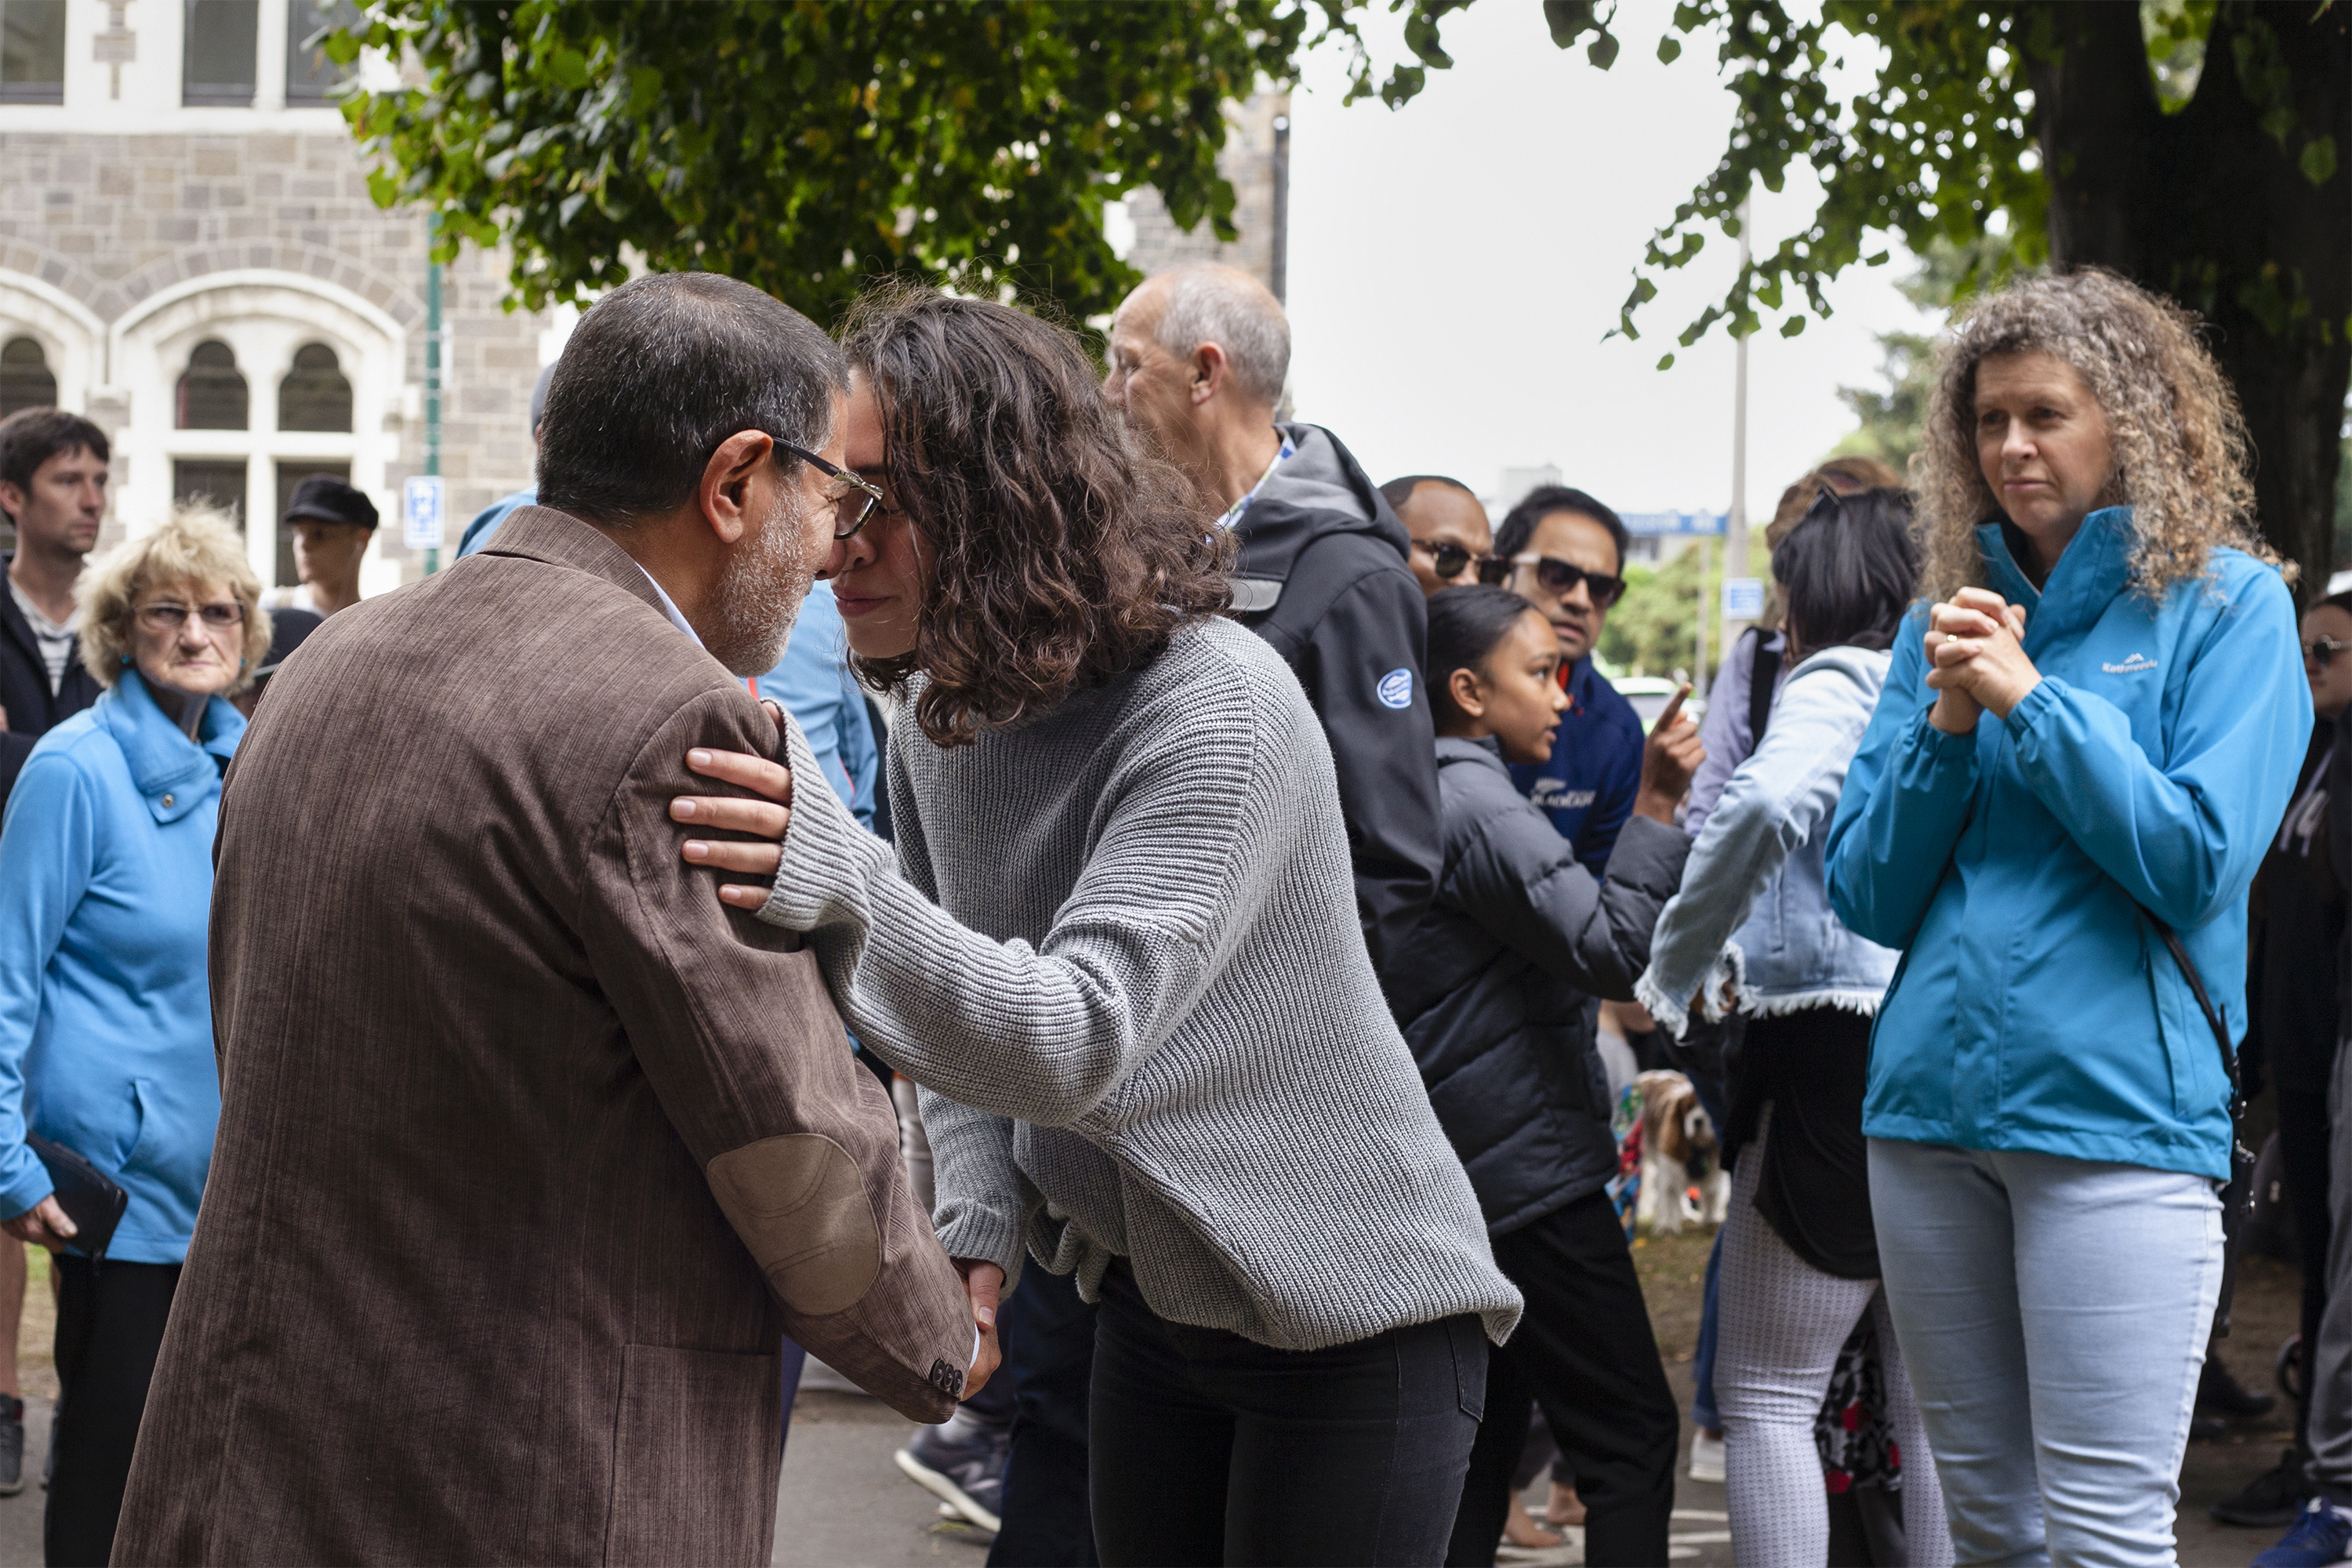 Supporters gather to comfort community members; a woman and man are shown holding hands in a hongi